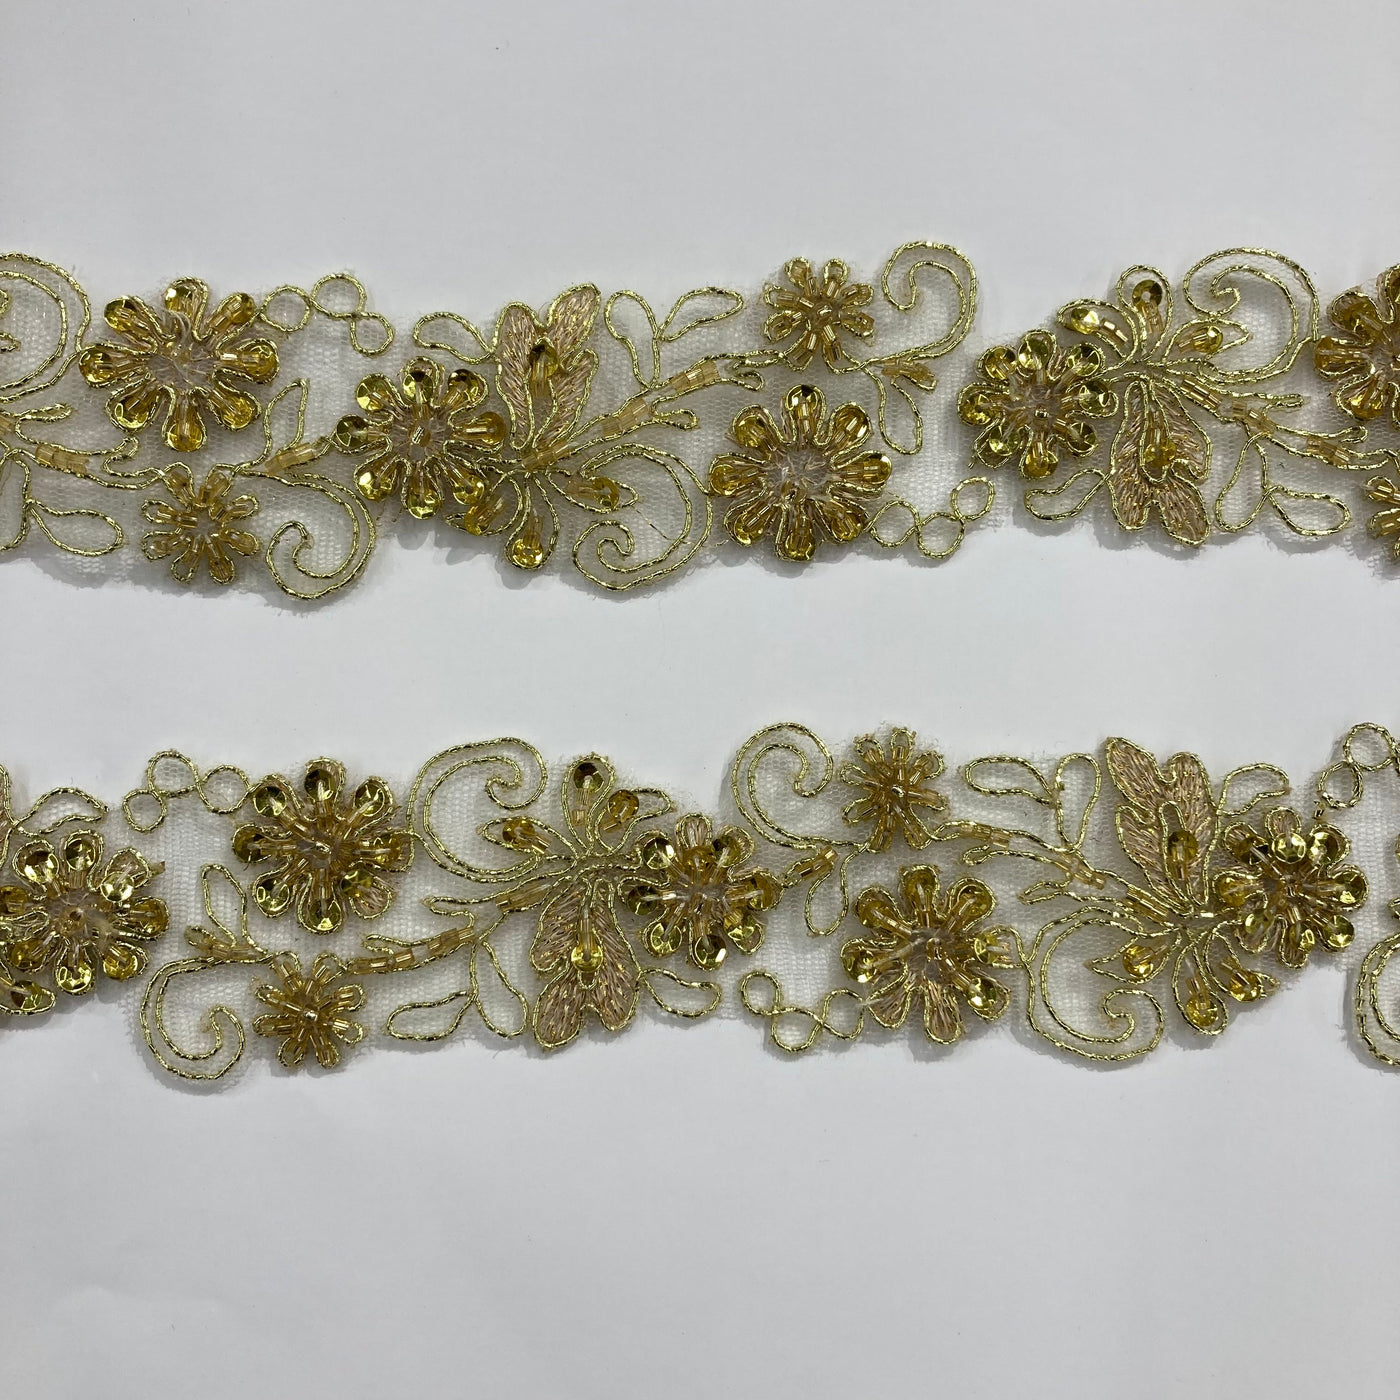 Beaded, Corded & Embroidered Metallic Gold Trimming. Lace Usa